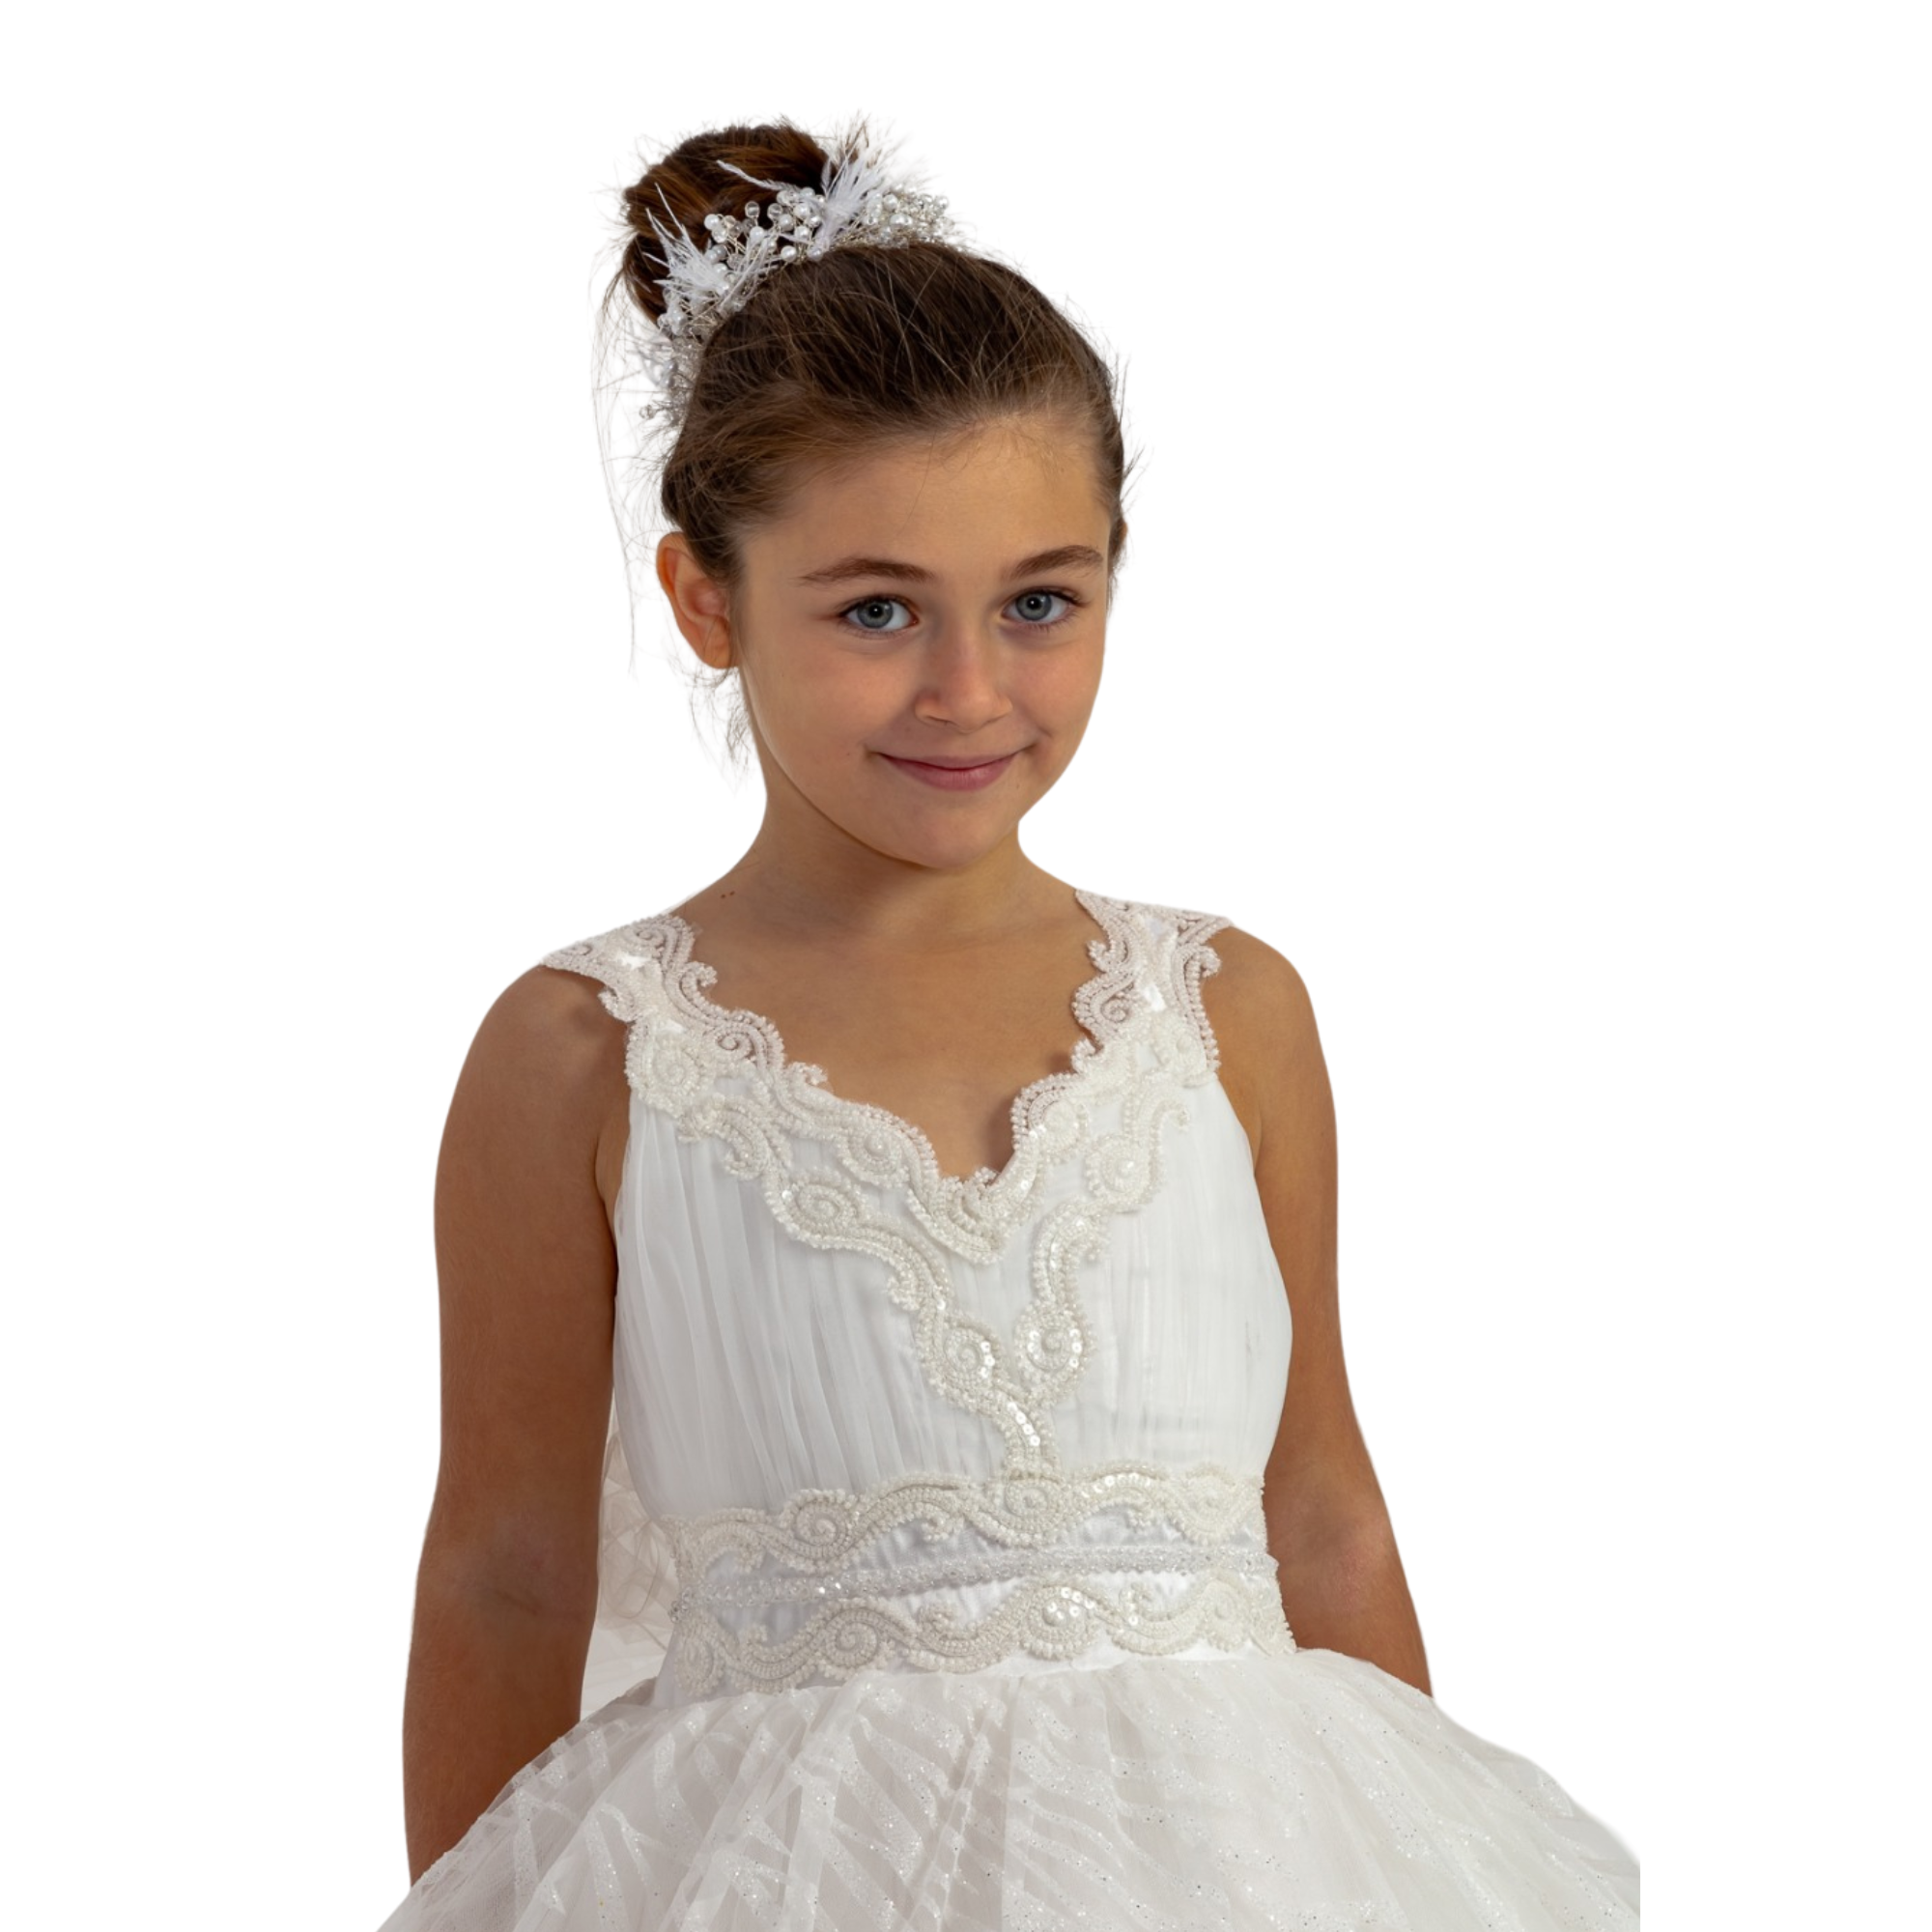 Lina's Gown Girls Formal Dress